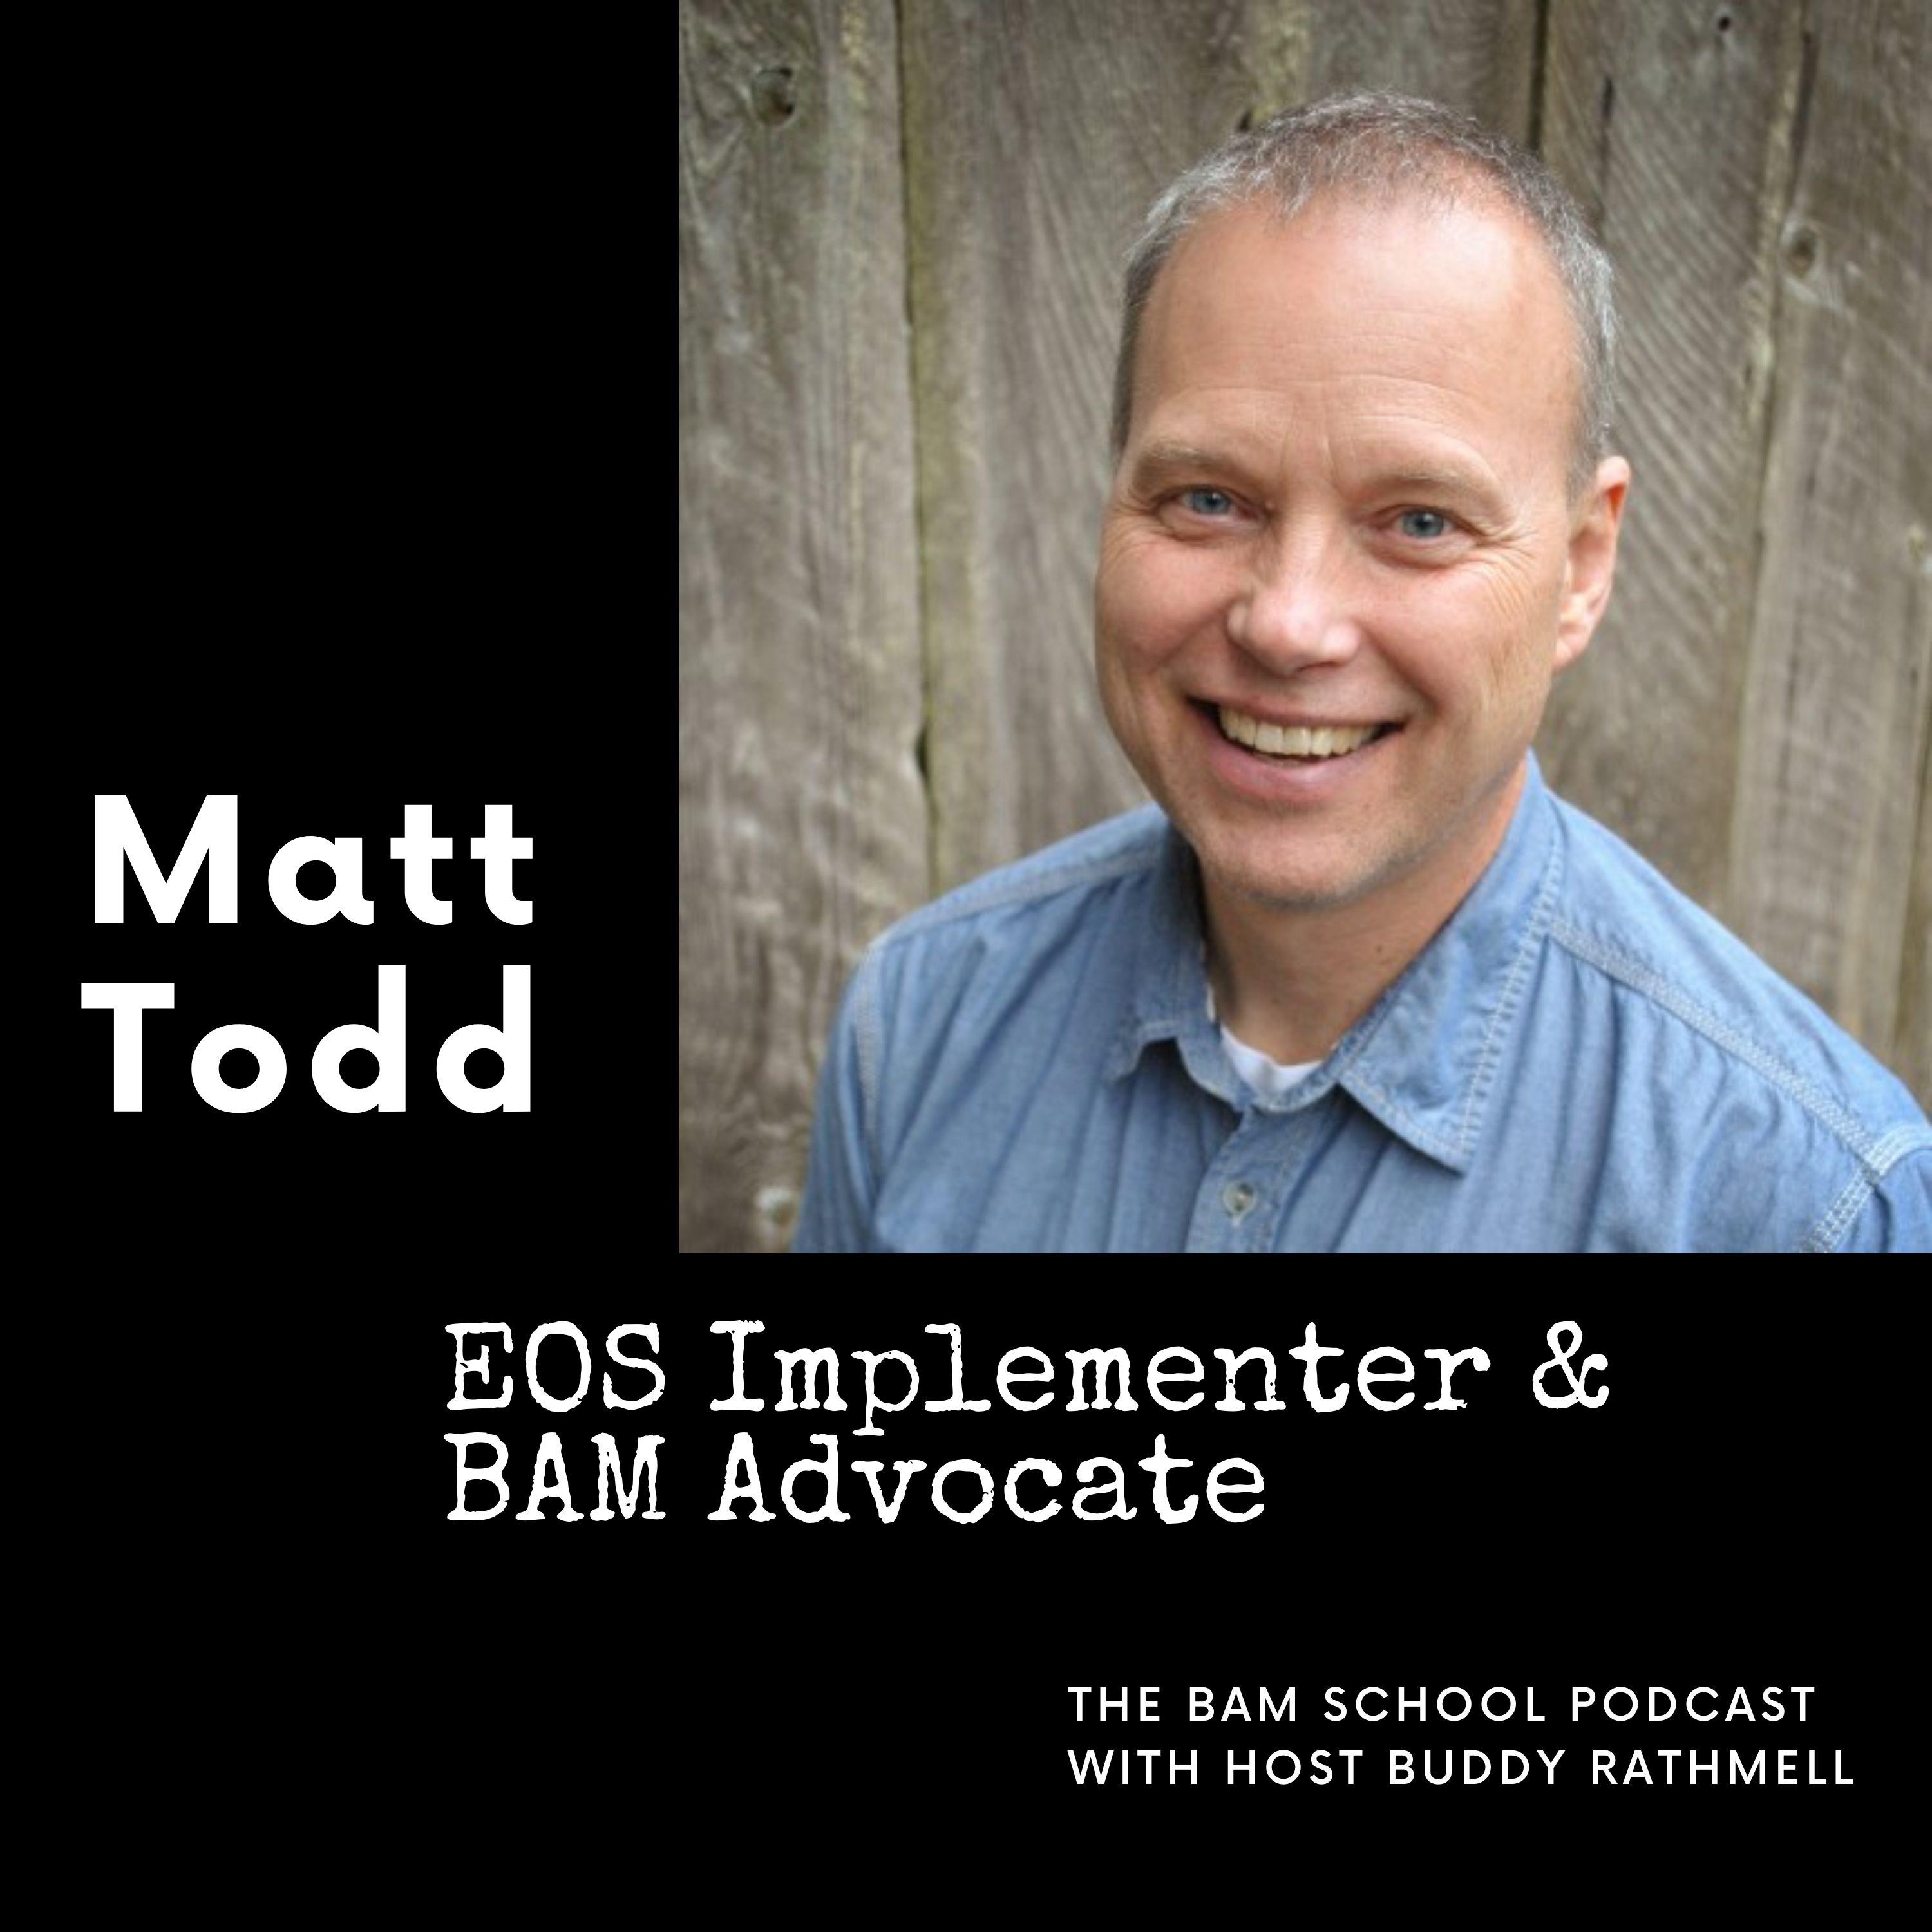 Doing What You Love With People You Love & Making A Big Difference - Matt Todd